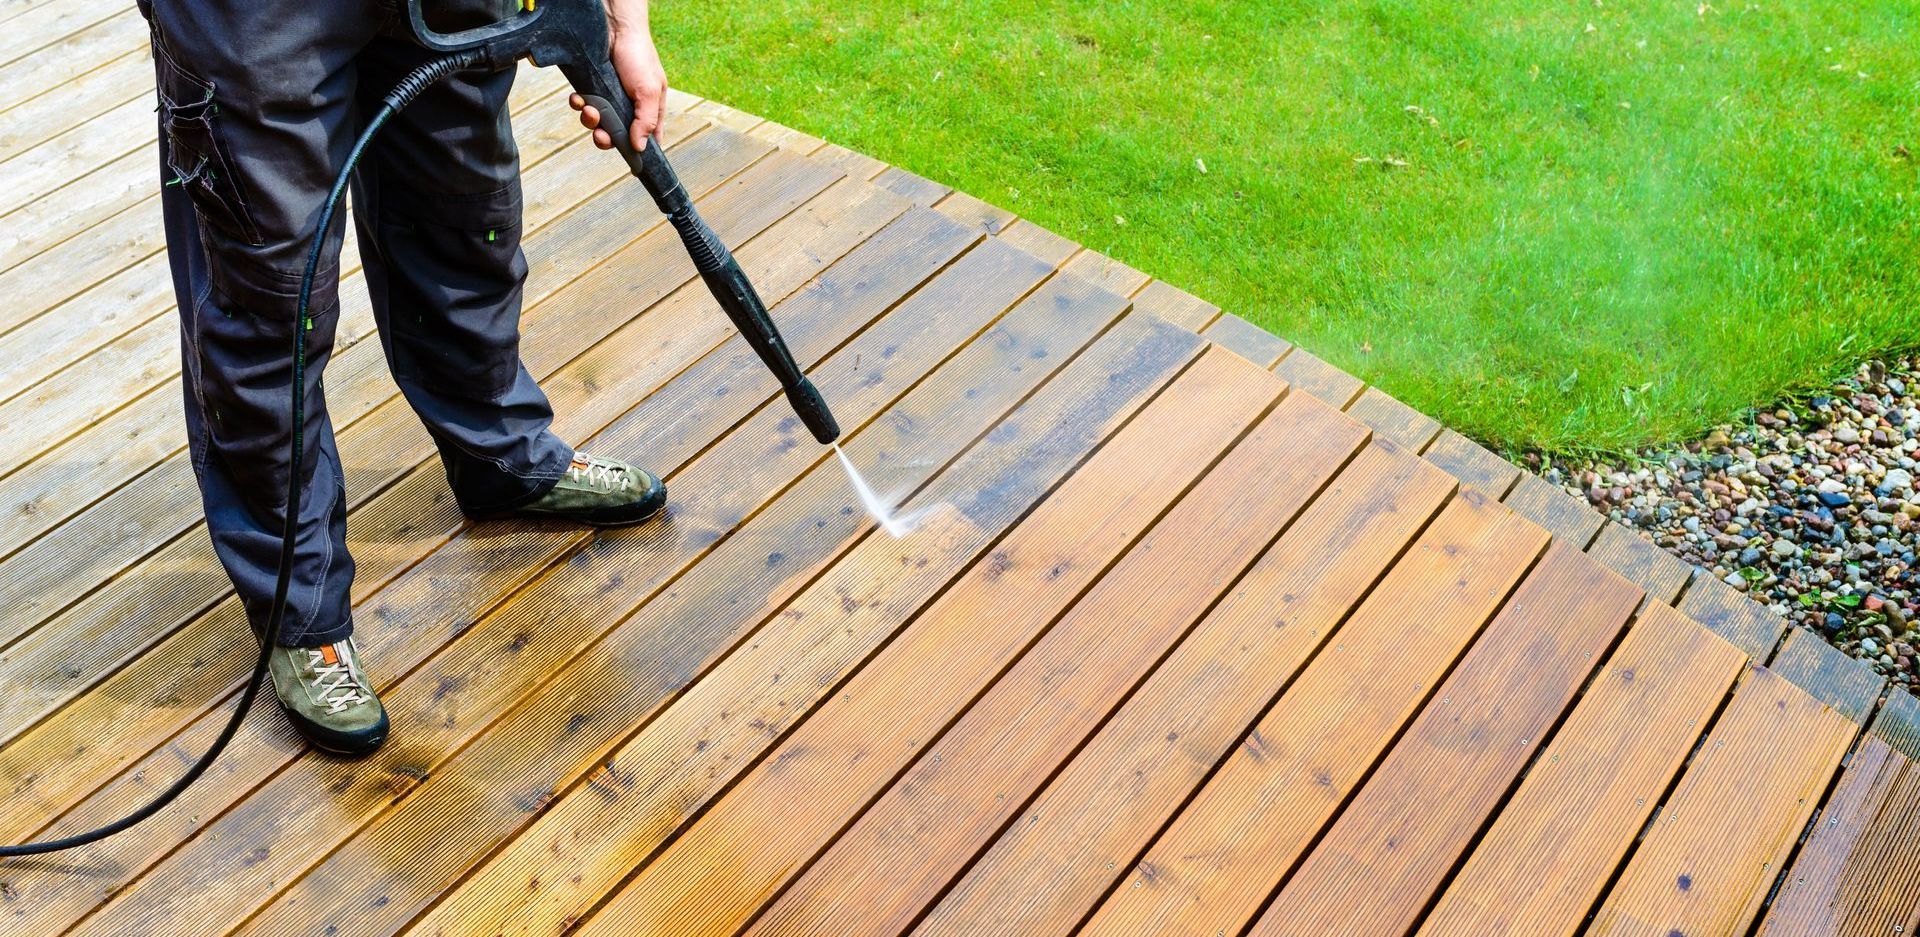 Best Residential Power Washing Company- Power Washer Anne Arundel County, MD